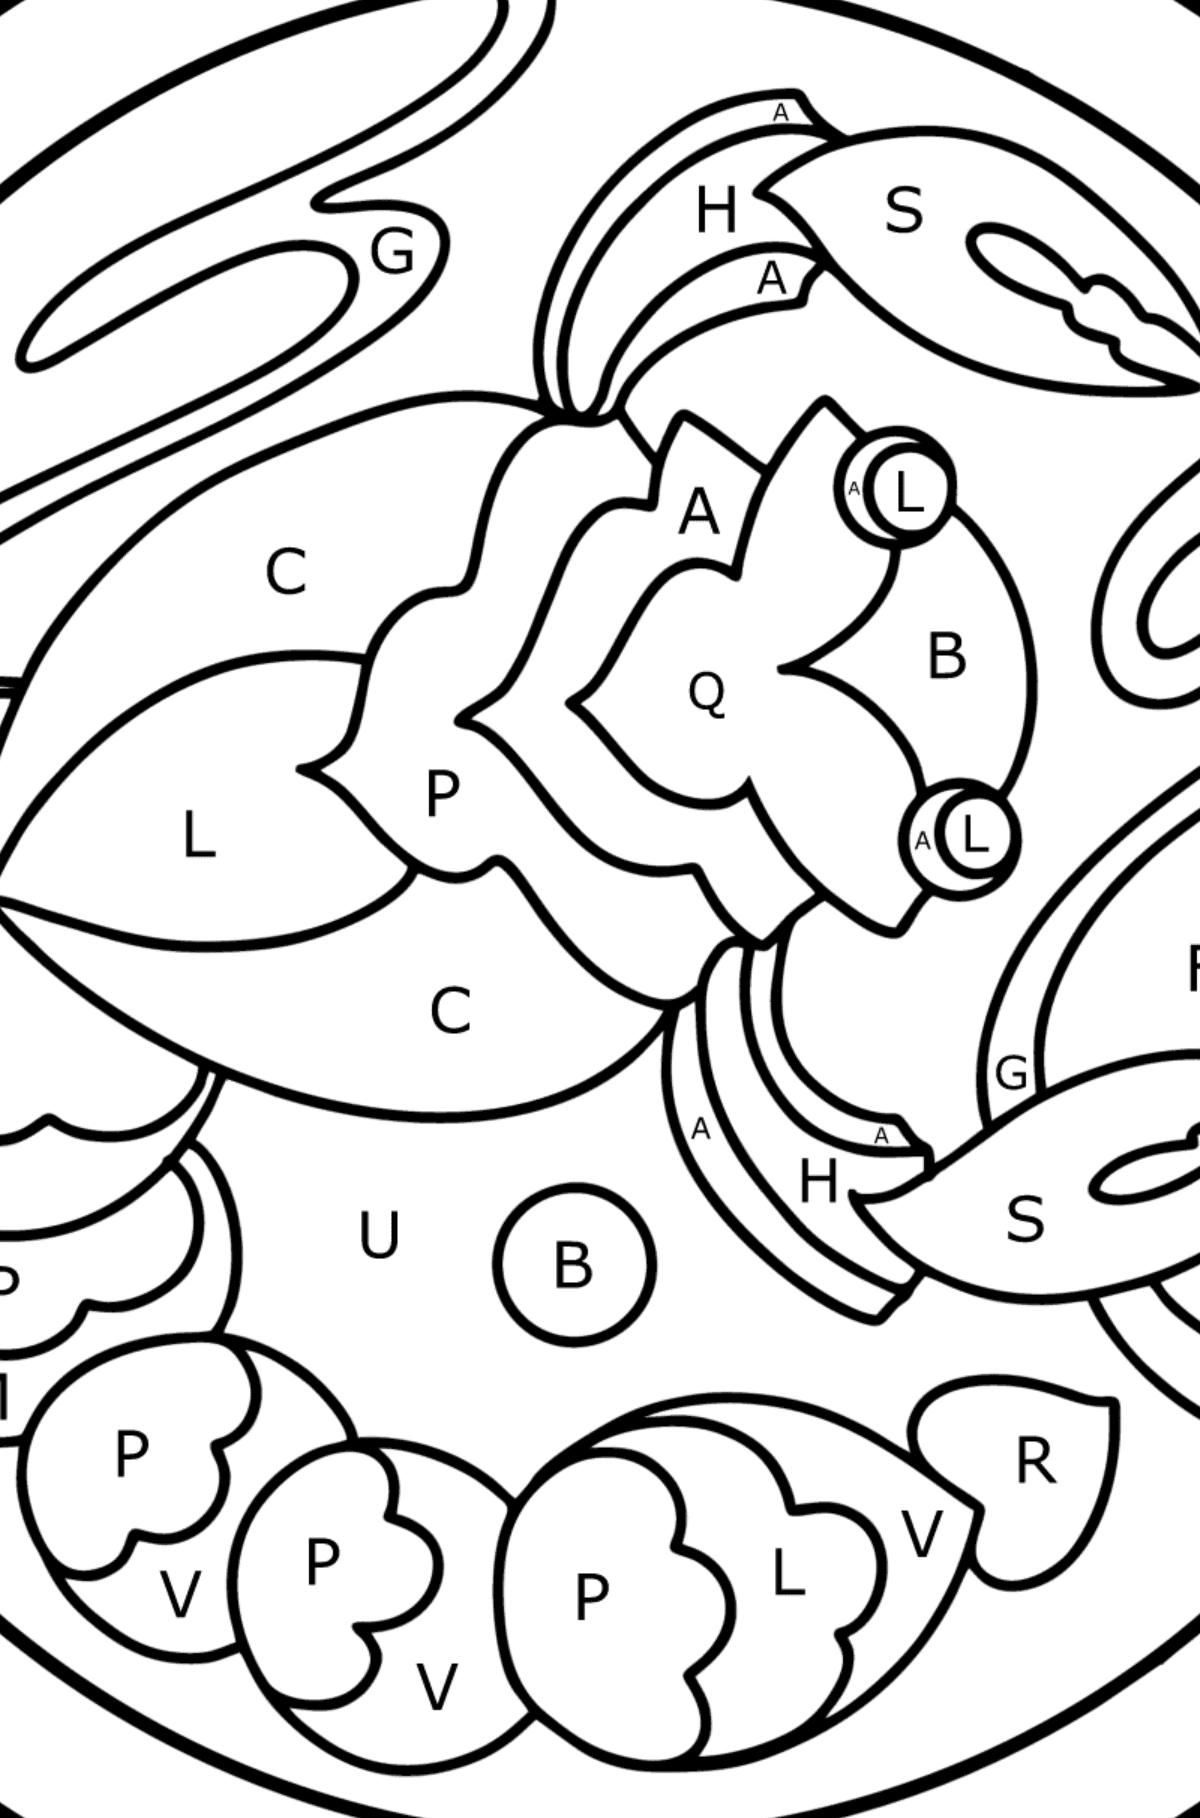 Coloring page for kids - zodiac sign Scorpio - Coloring by Letters for Kids